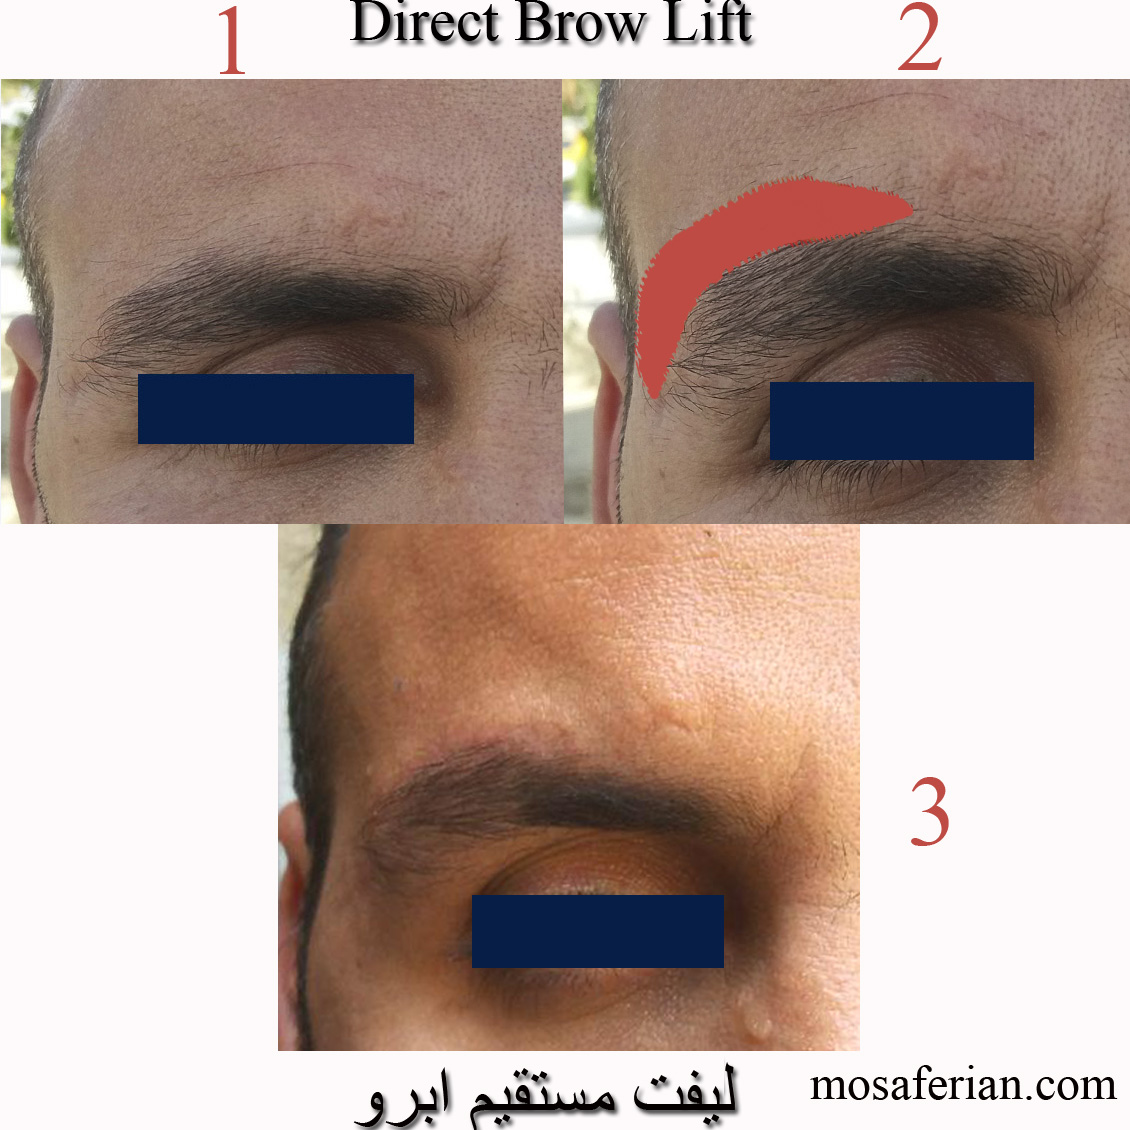 Mini brow lift before and after photos